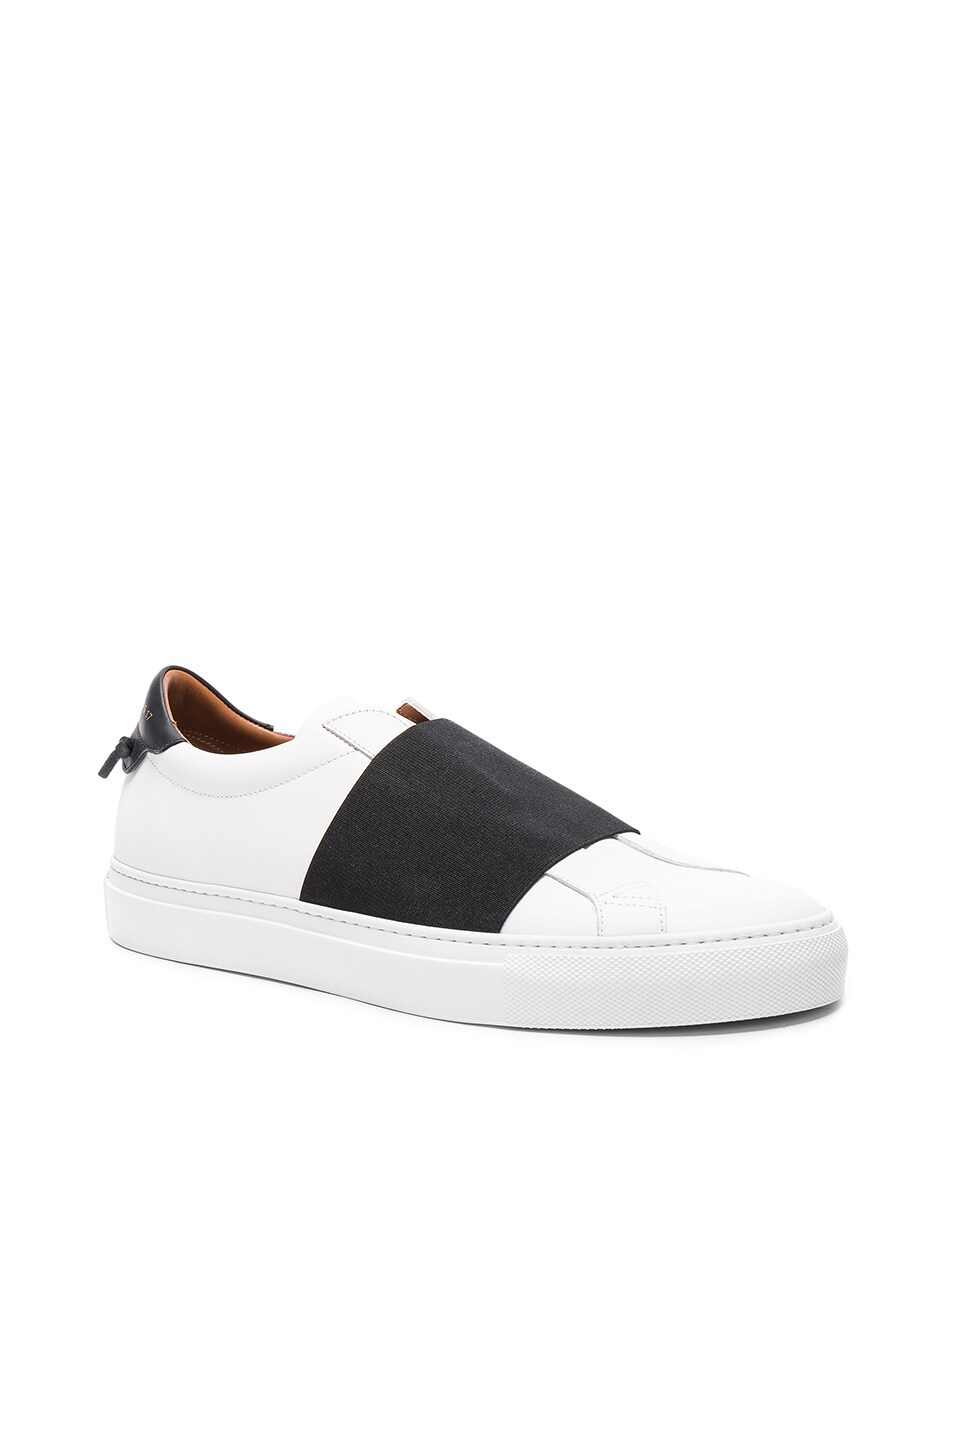 Image 1 of Givenchy Strap Leather Sneakers in White & Black